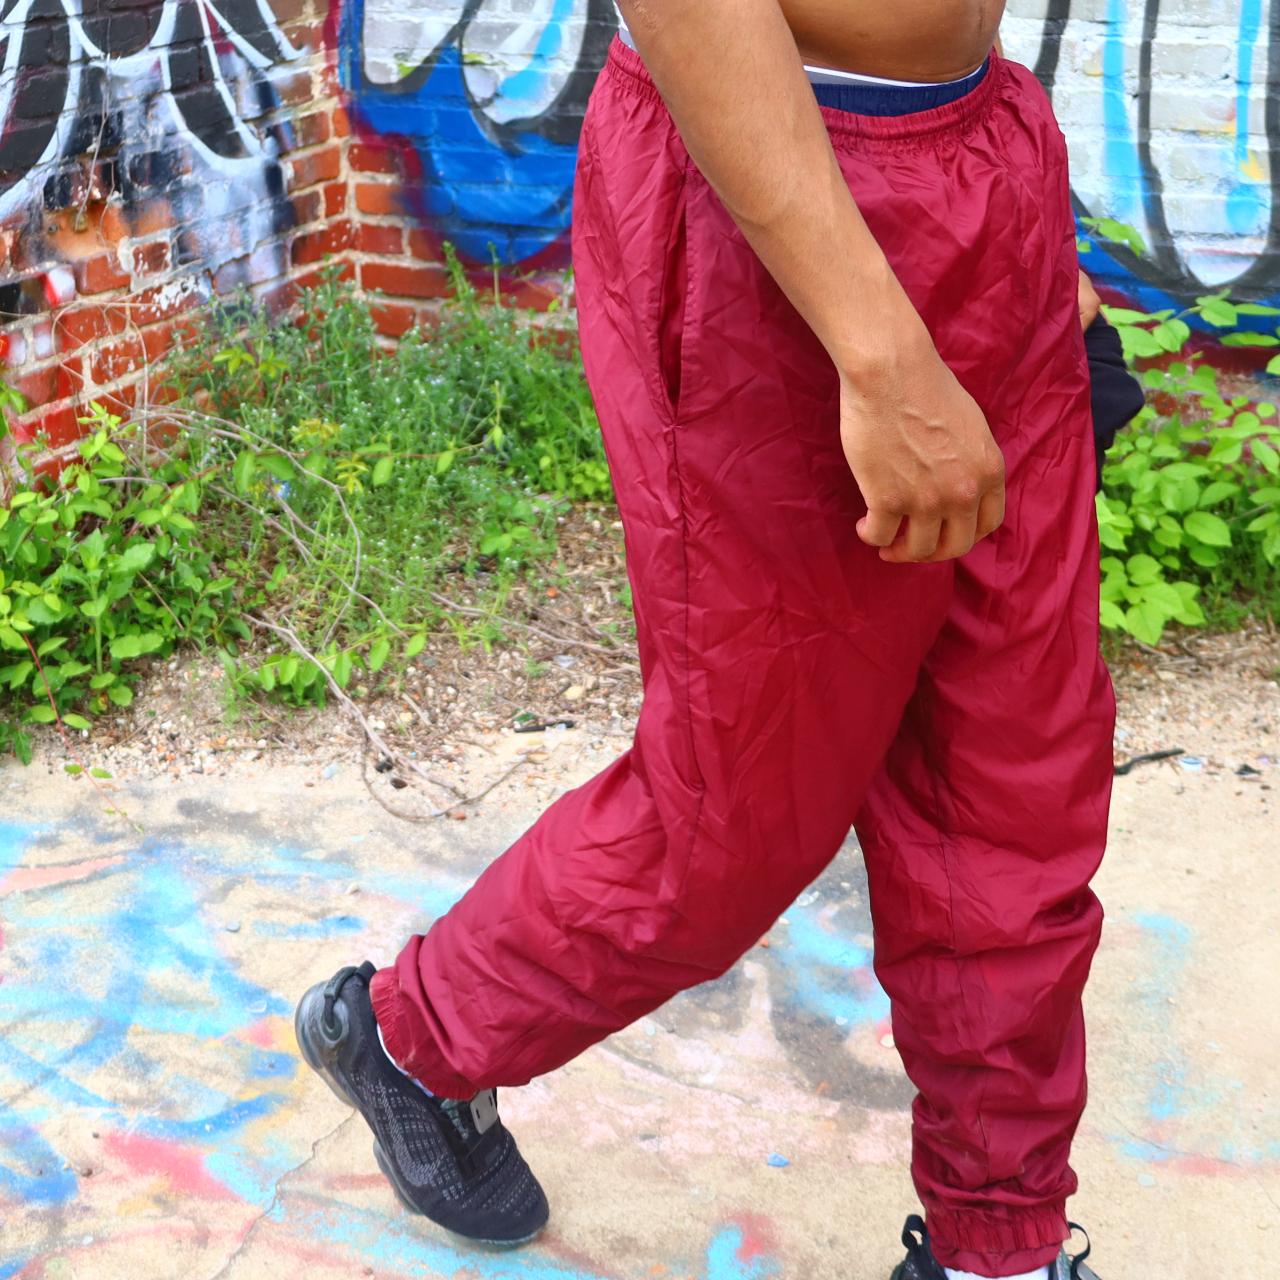 Vintage Nike Burgundy Track Pants - Retro Athletic Style for the Win!